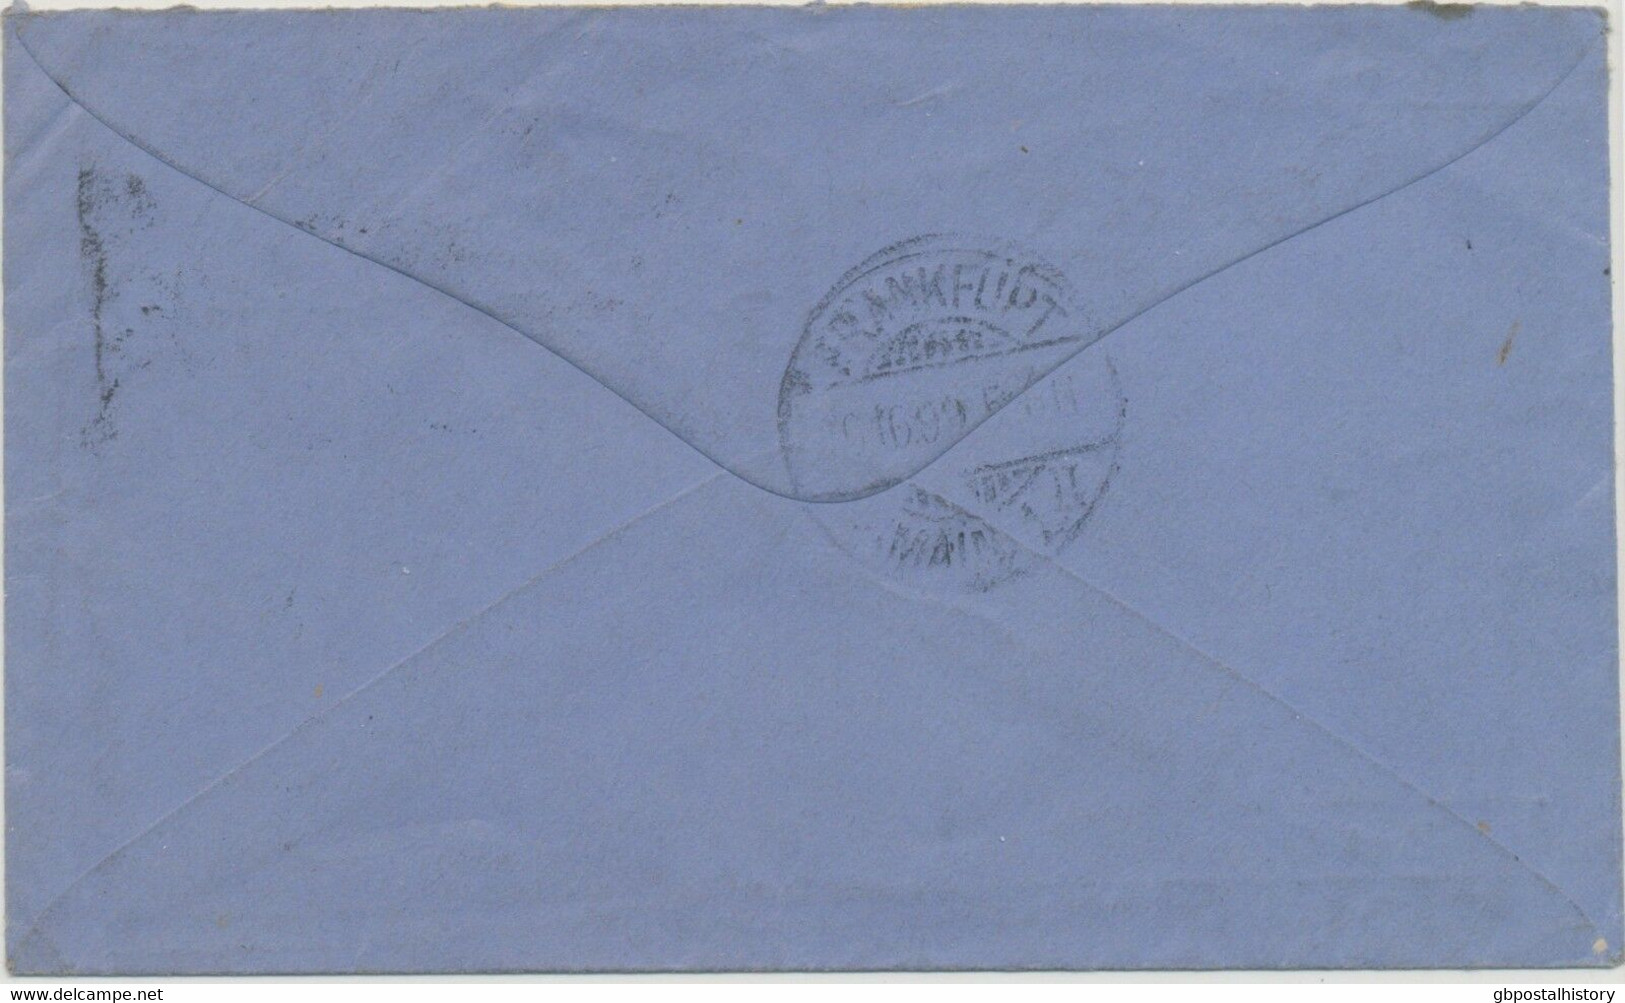 GB 1899 QV Jubilee 2 1/2D Tied By CDS LONDON On P.O.-OFFICIAL Cover To FRANKFORT - Service